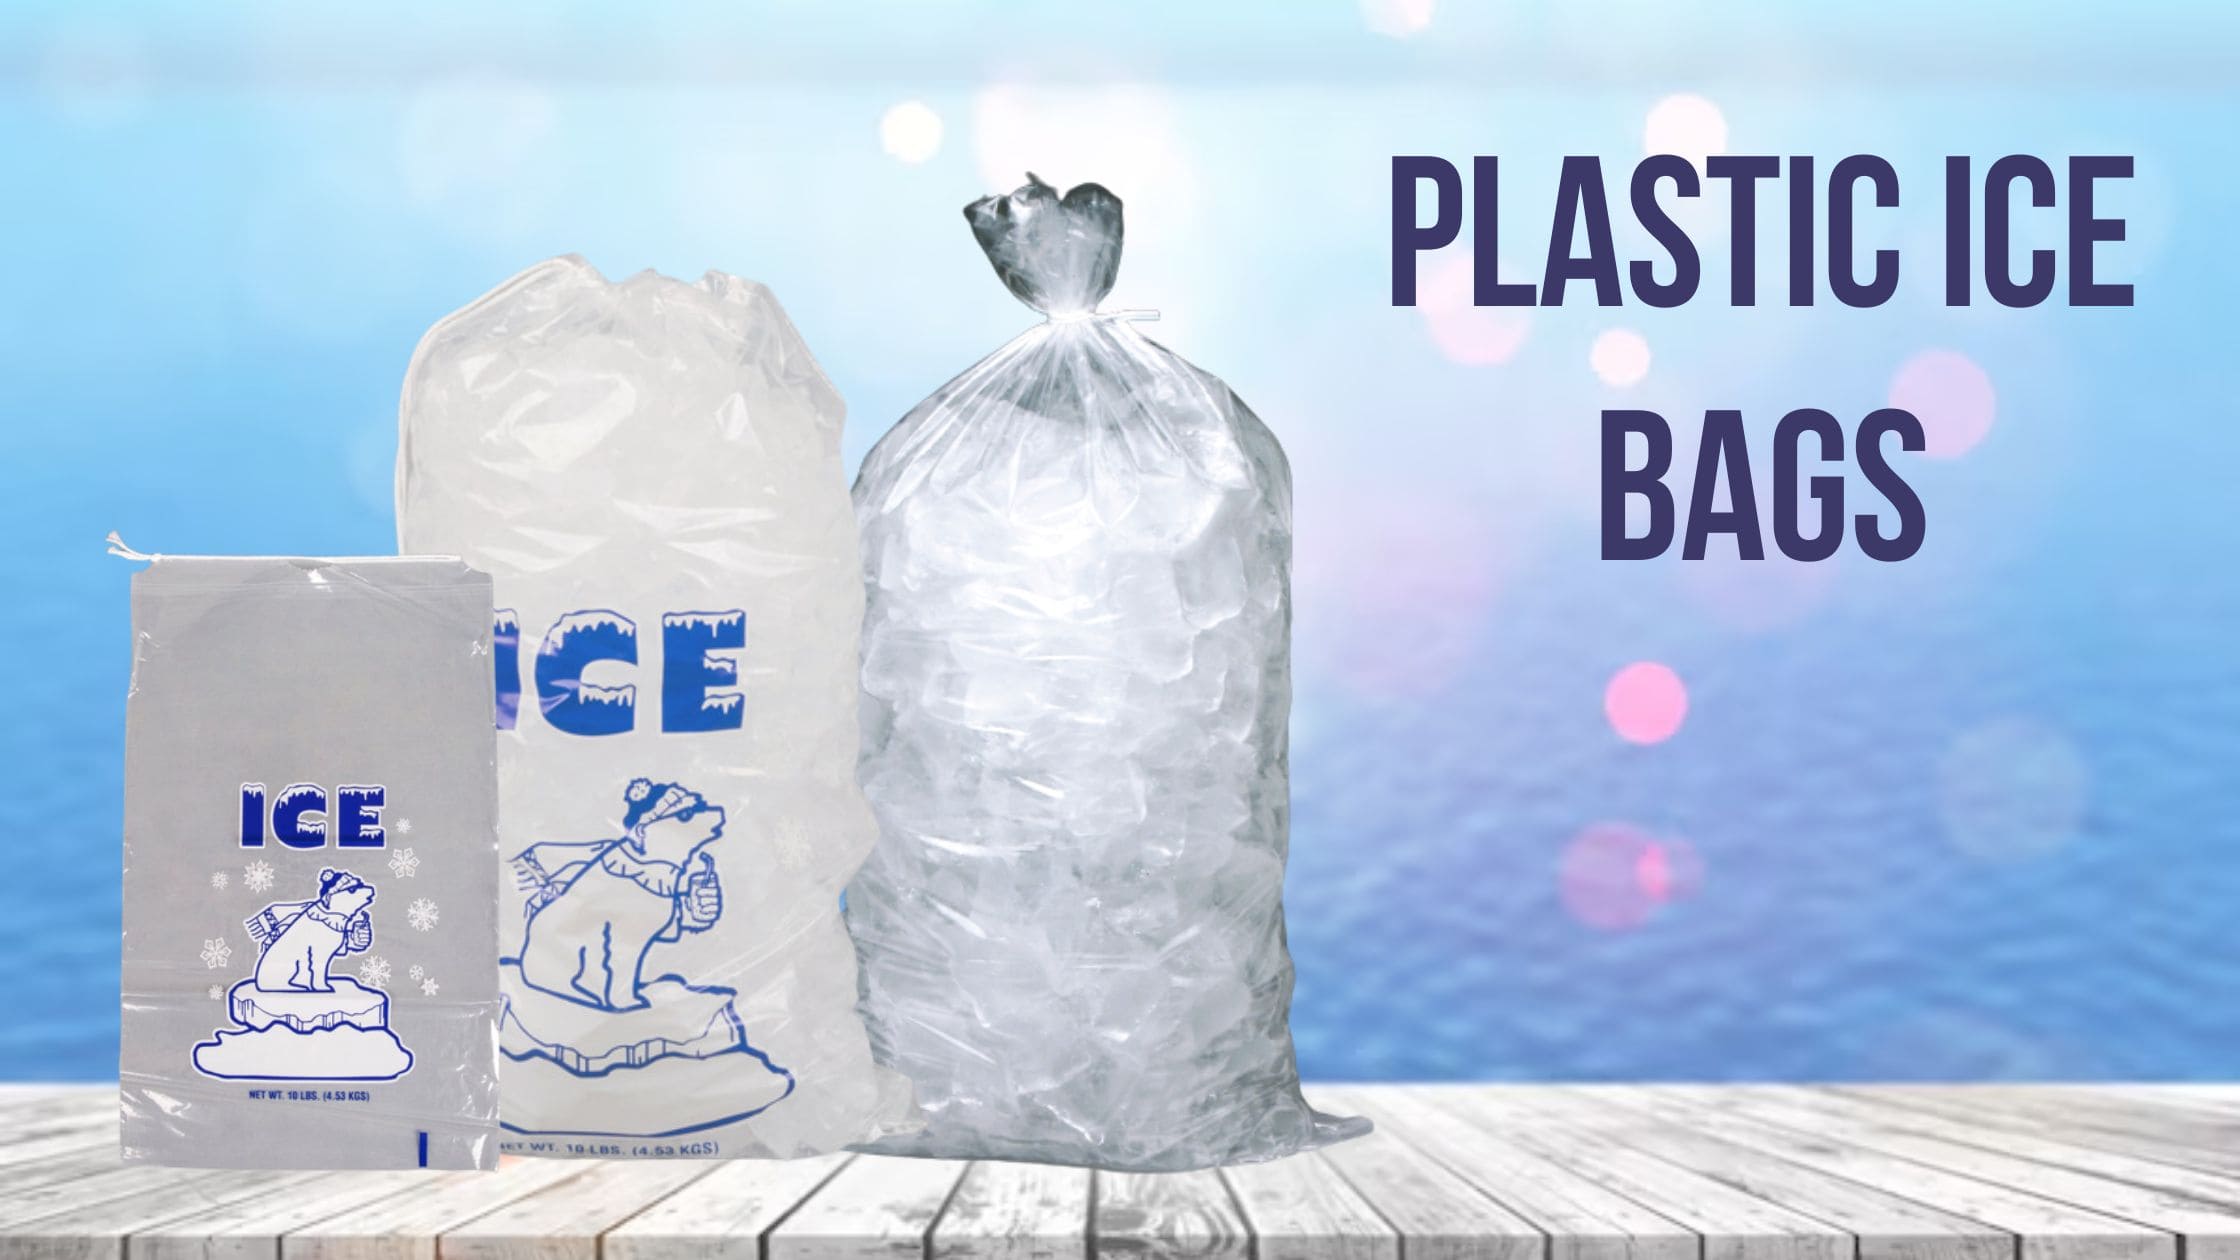 Plastic Bag and Plastic Straw Regulations | West Goshen Township, PA